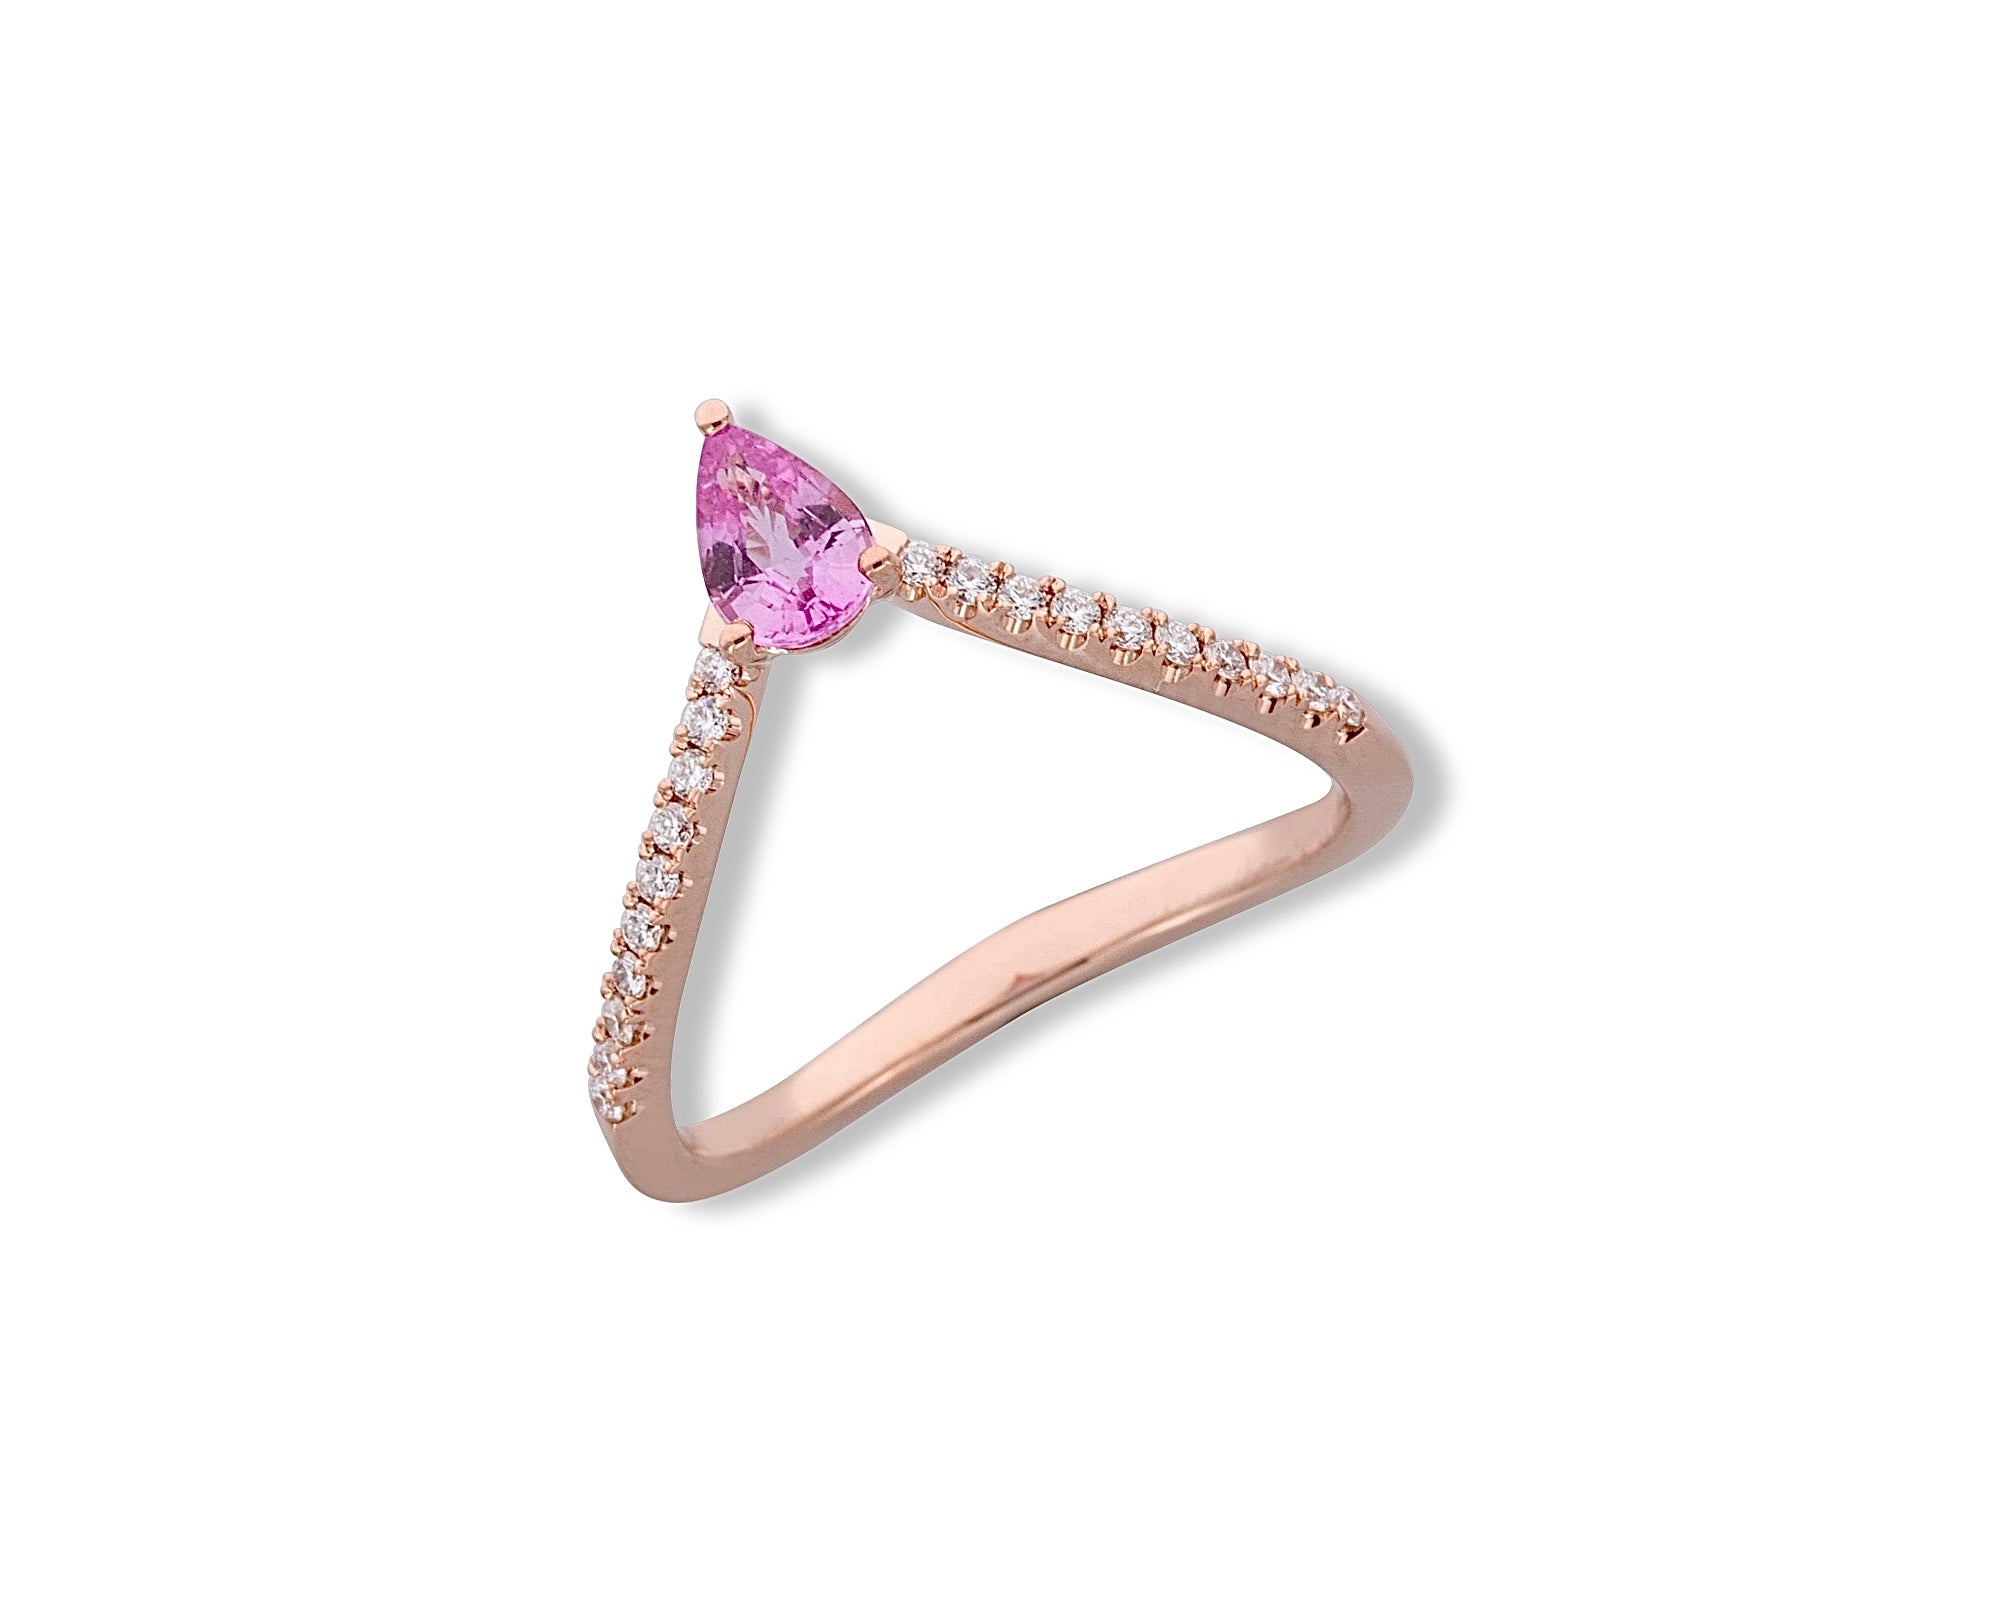 Pink Pear Ring